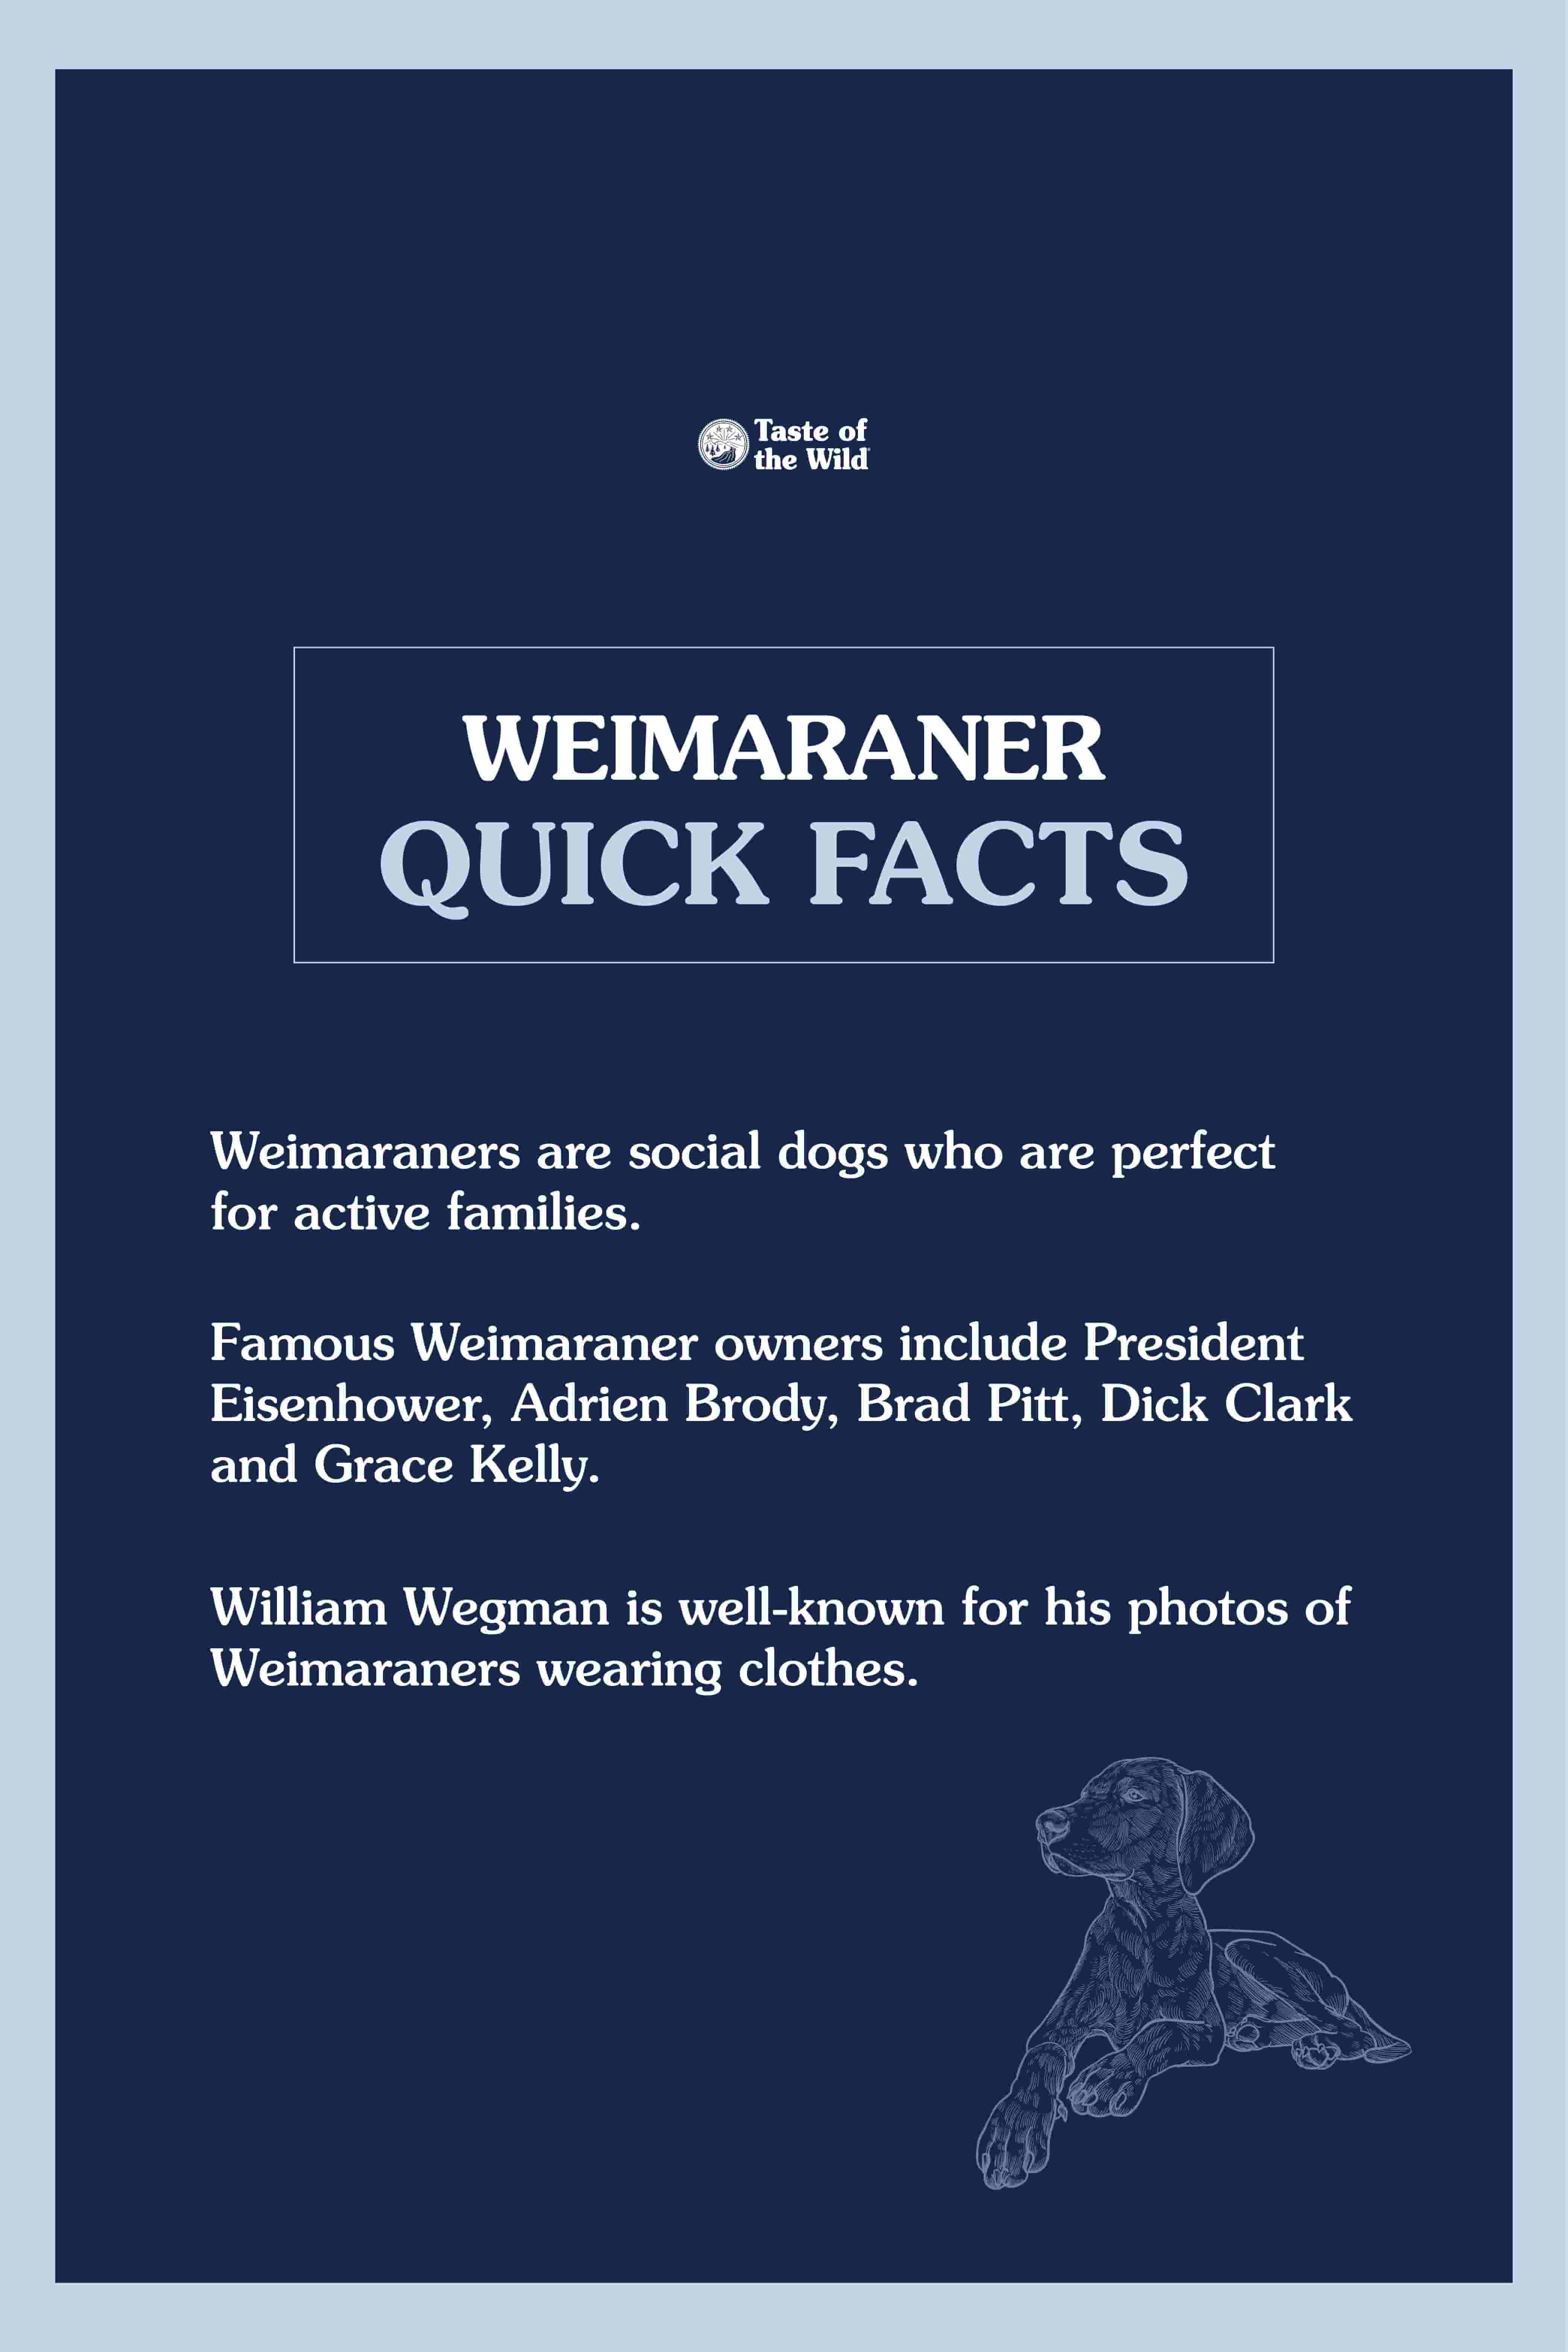 An interior graphic detailing three quick facts about Weimaraners.